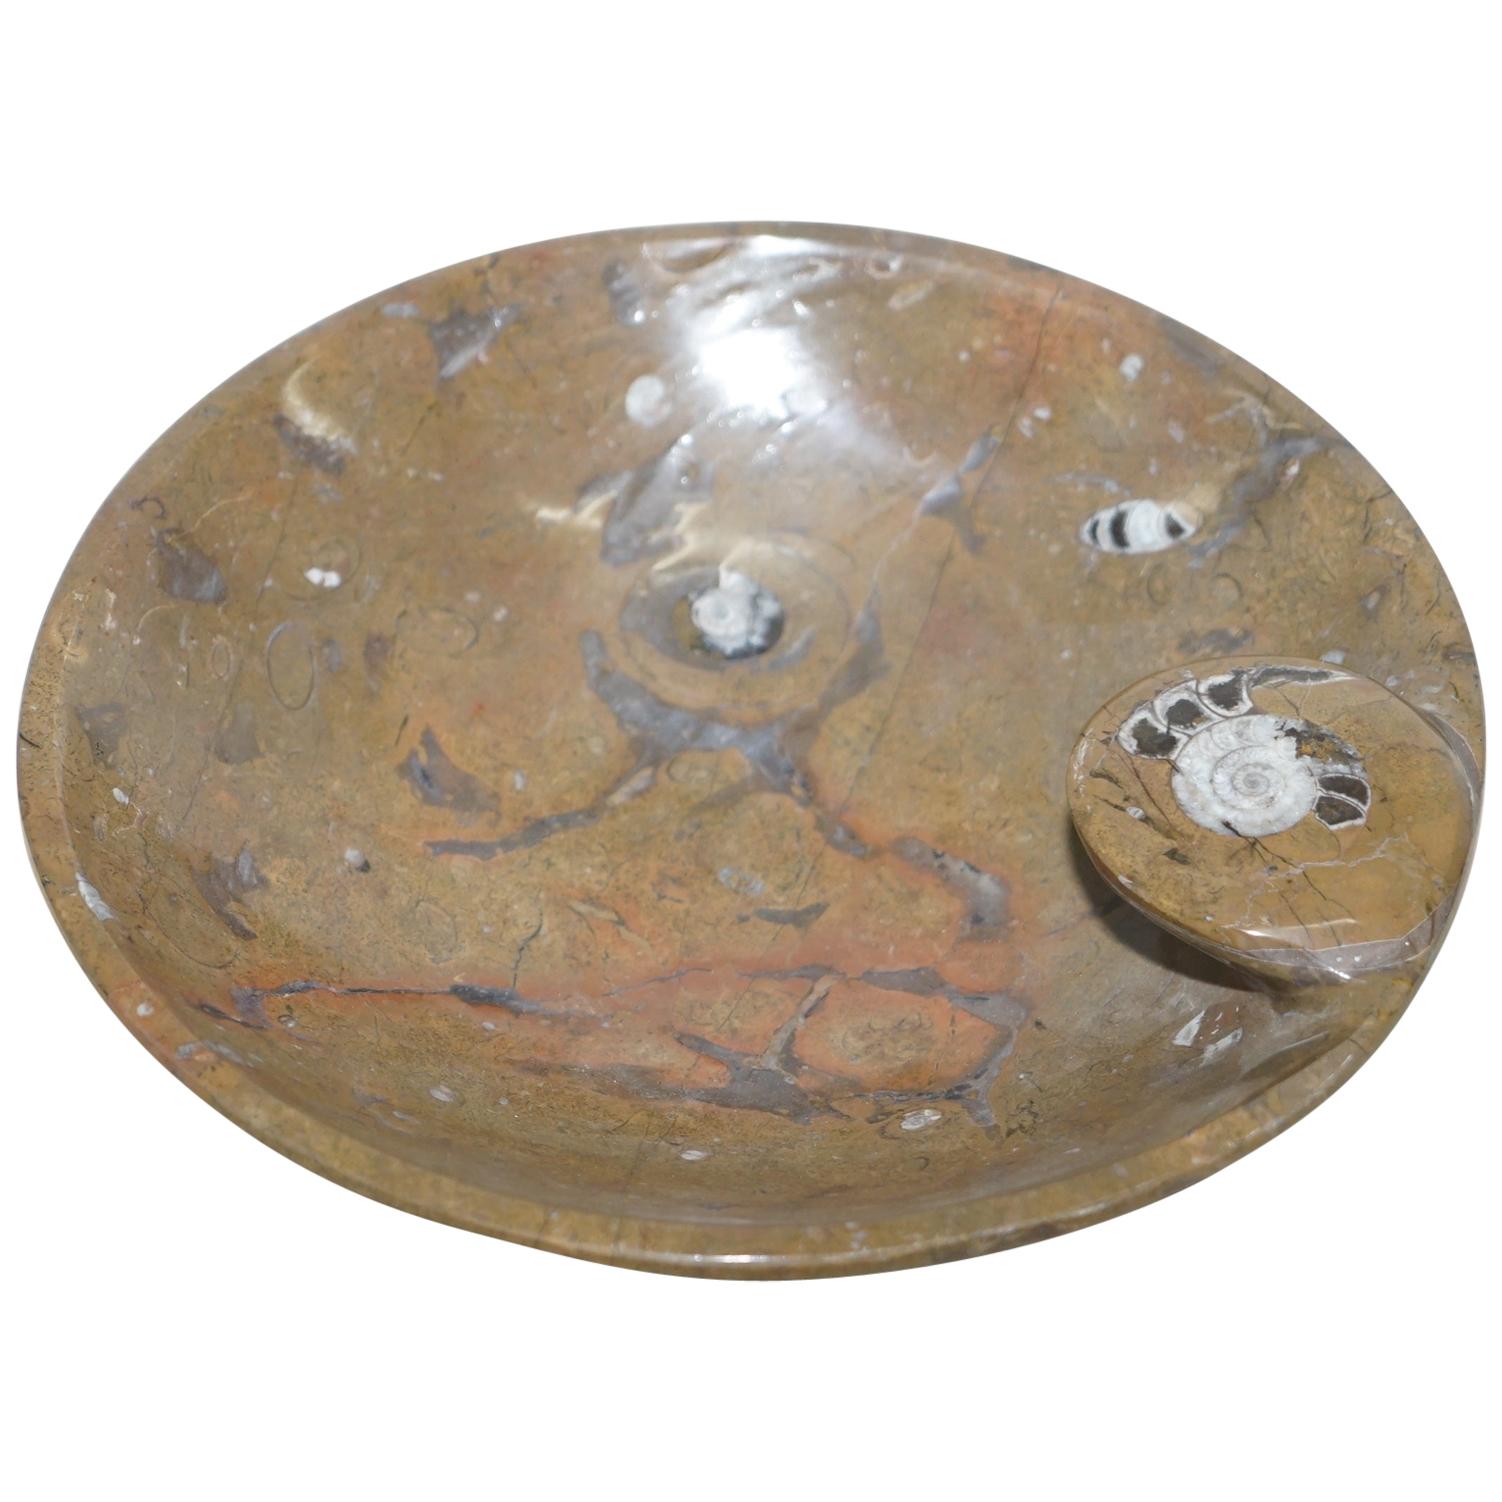 1 of 4 Very Rare Moroccan Ammonite Atlas Mountains Fossil Bowls Marble Finish For Sale